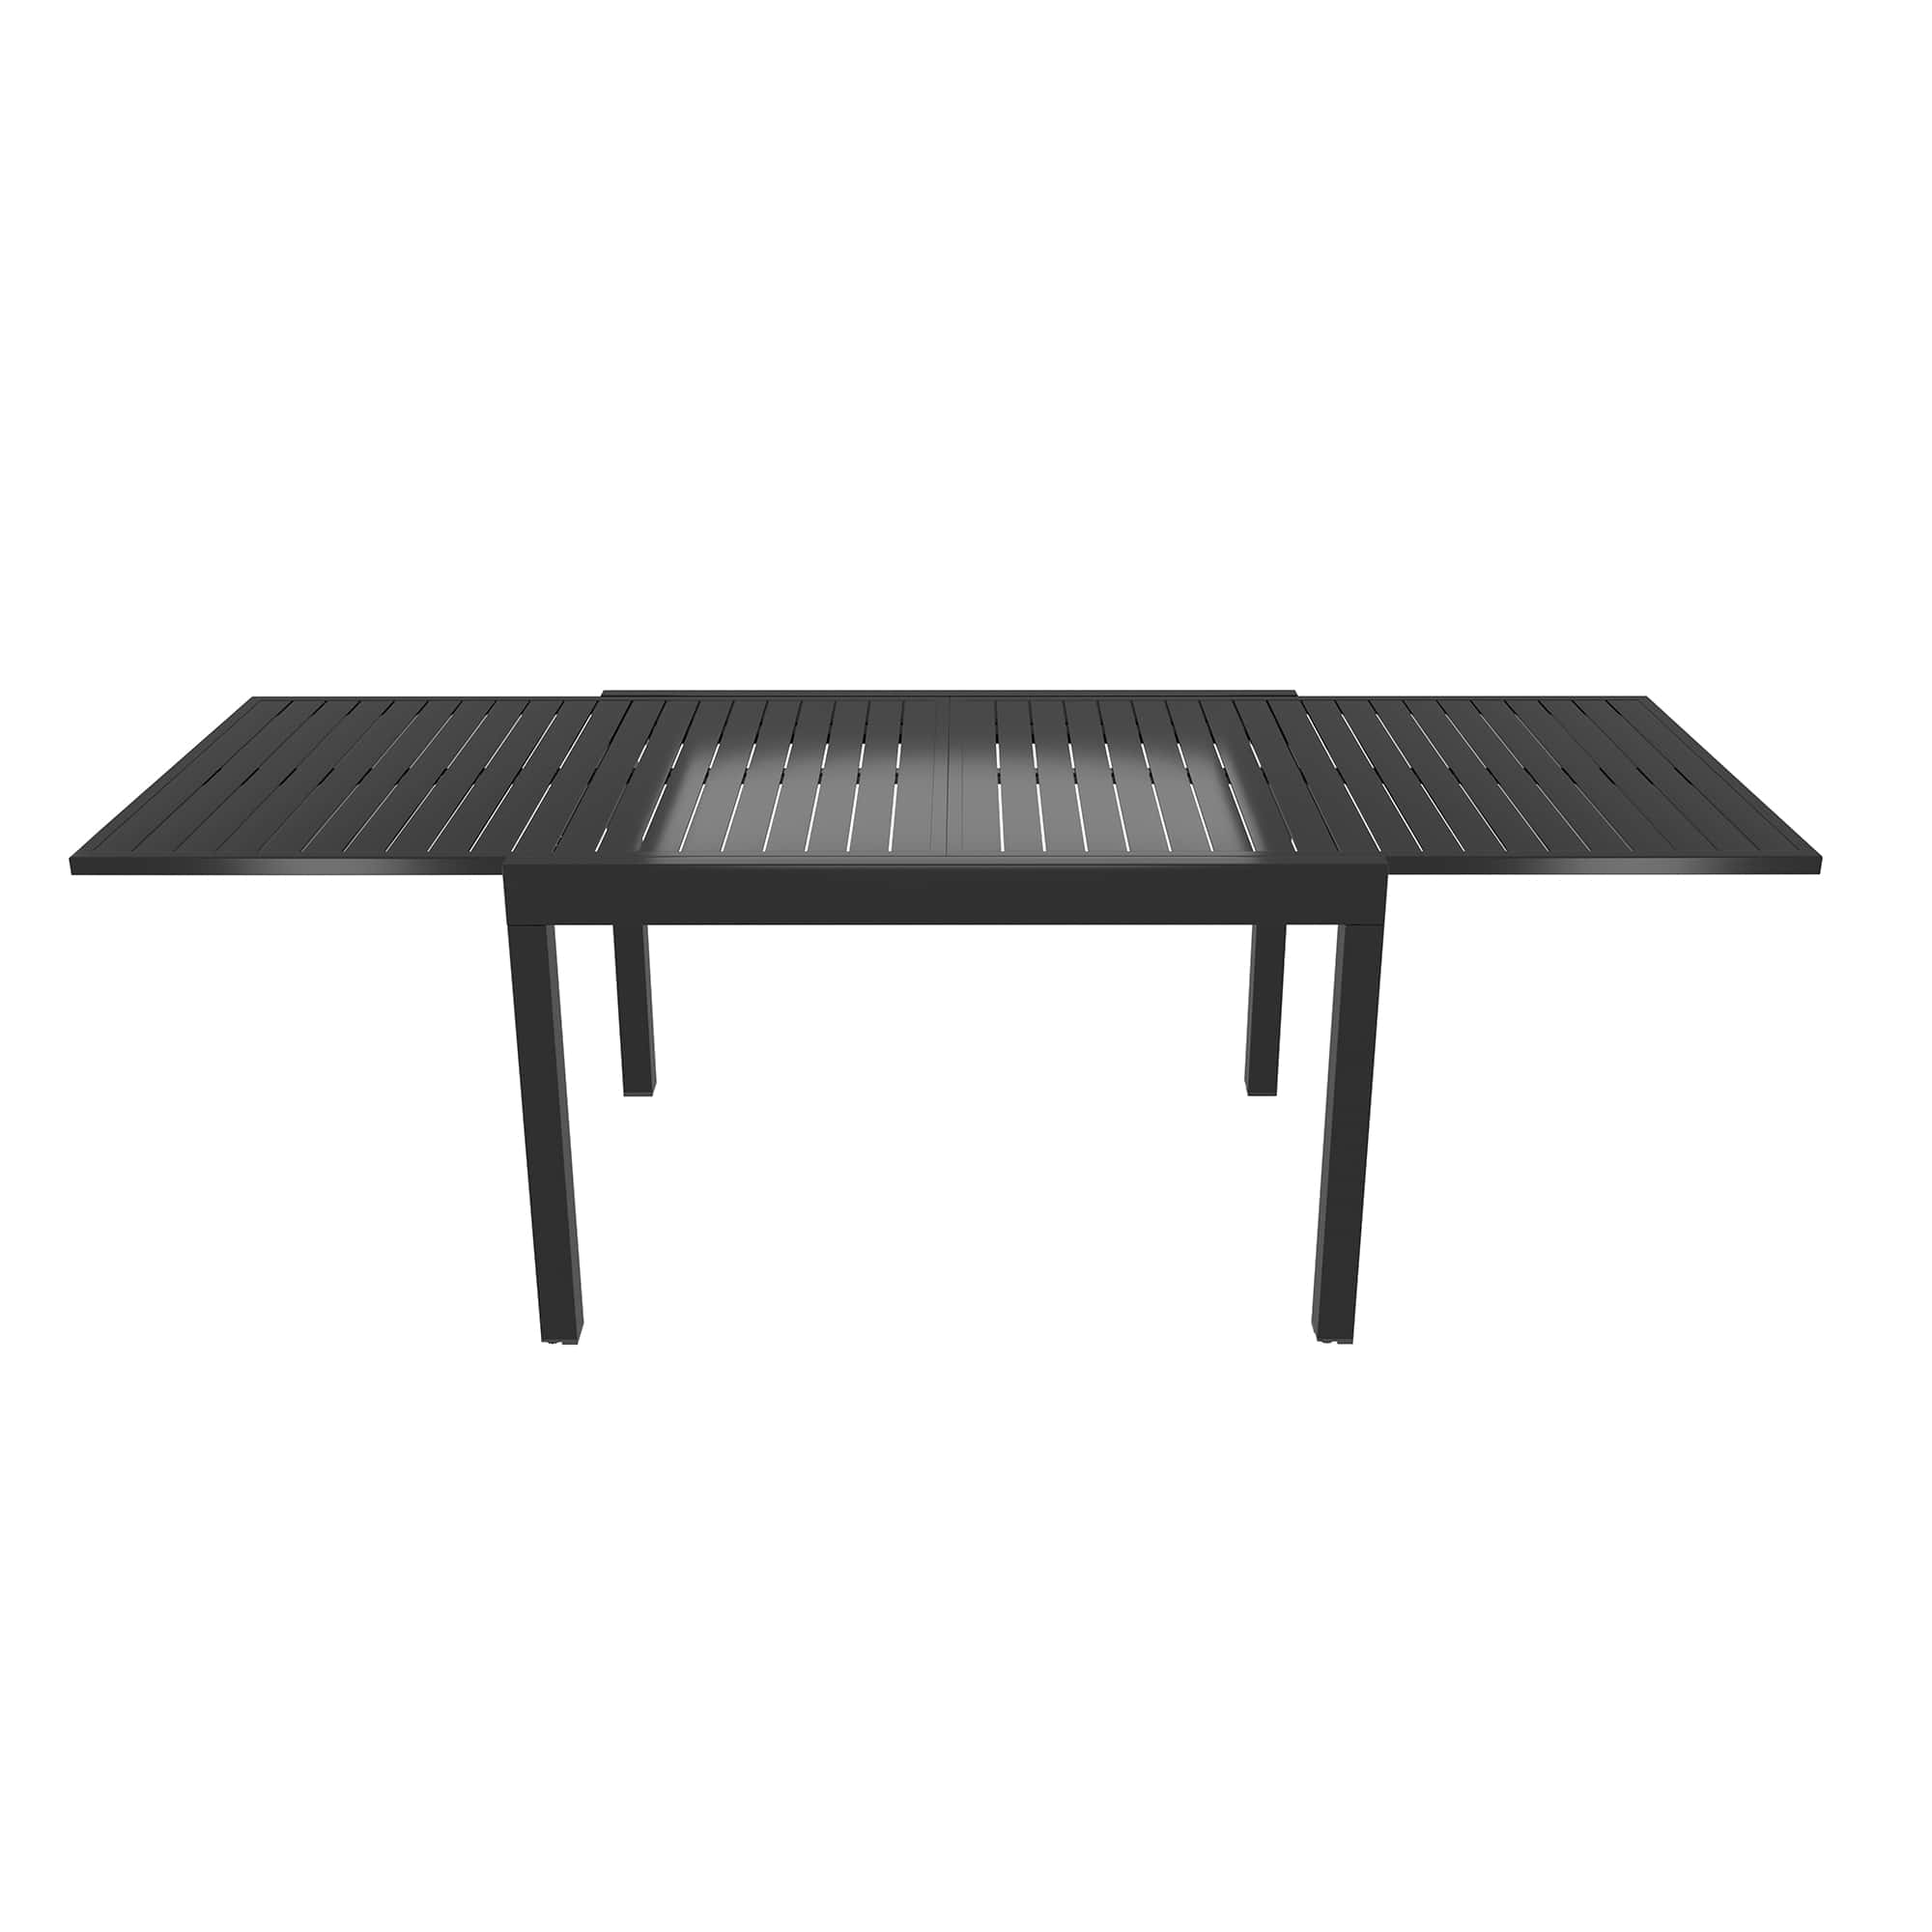 cSquare Aluminum Extendable Outdoor Dining Table35.4-in W x 53-106-in 